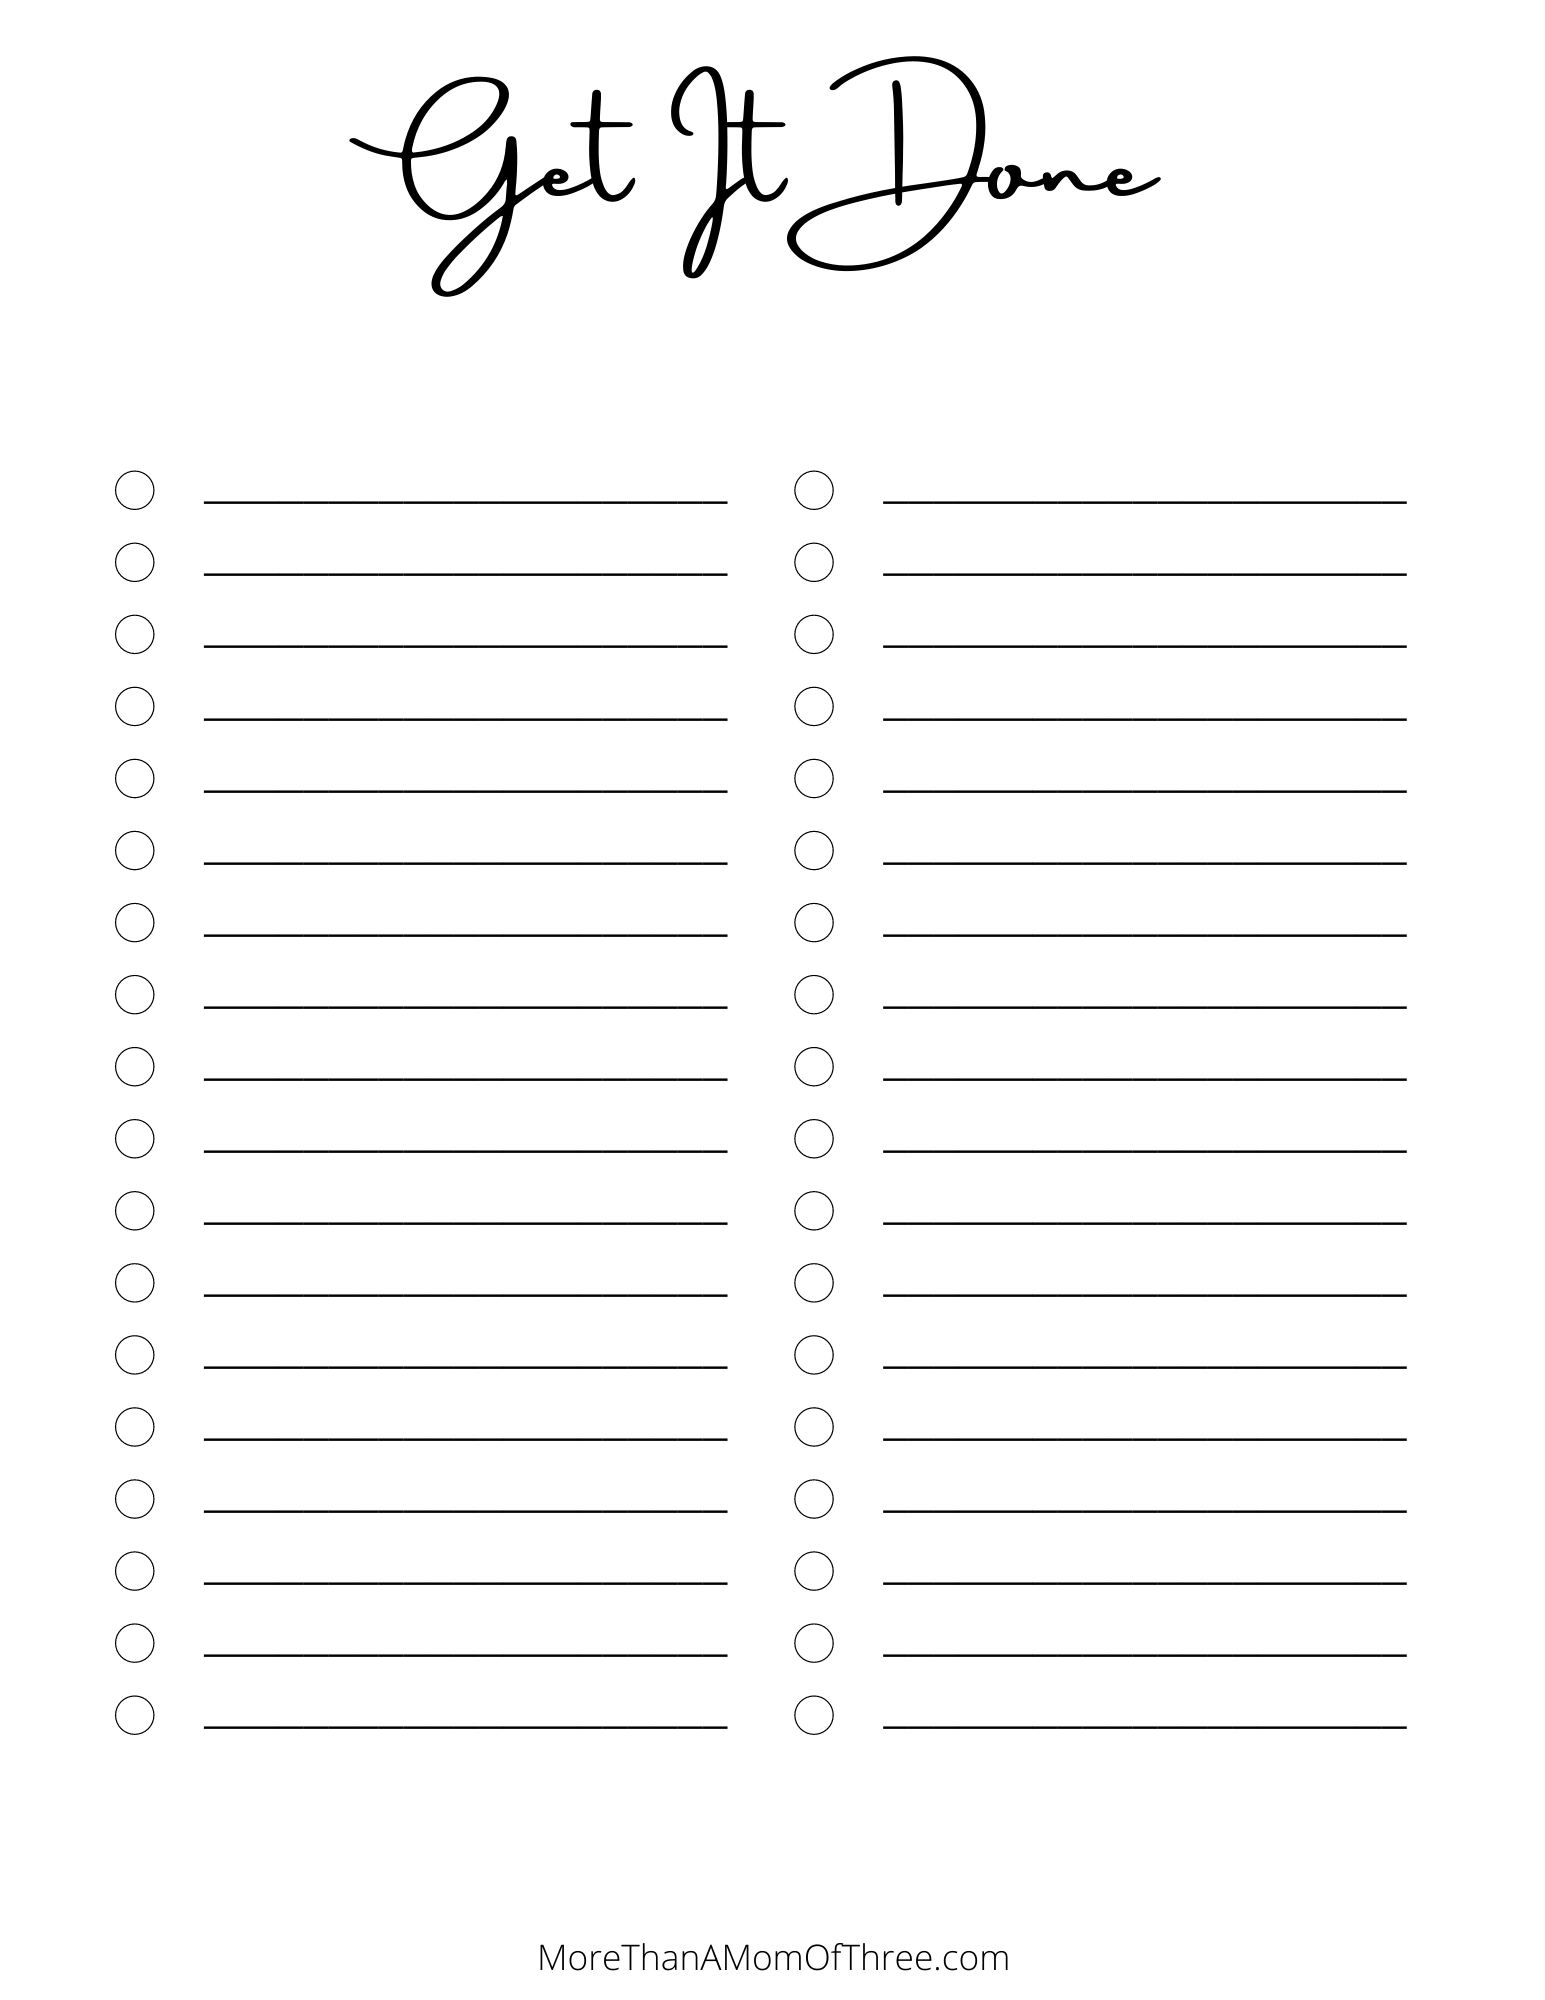 Print A To-Do List Template  Printable To Do Lists For Blank To Do List Template